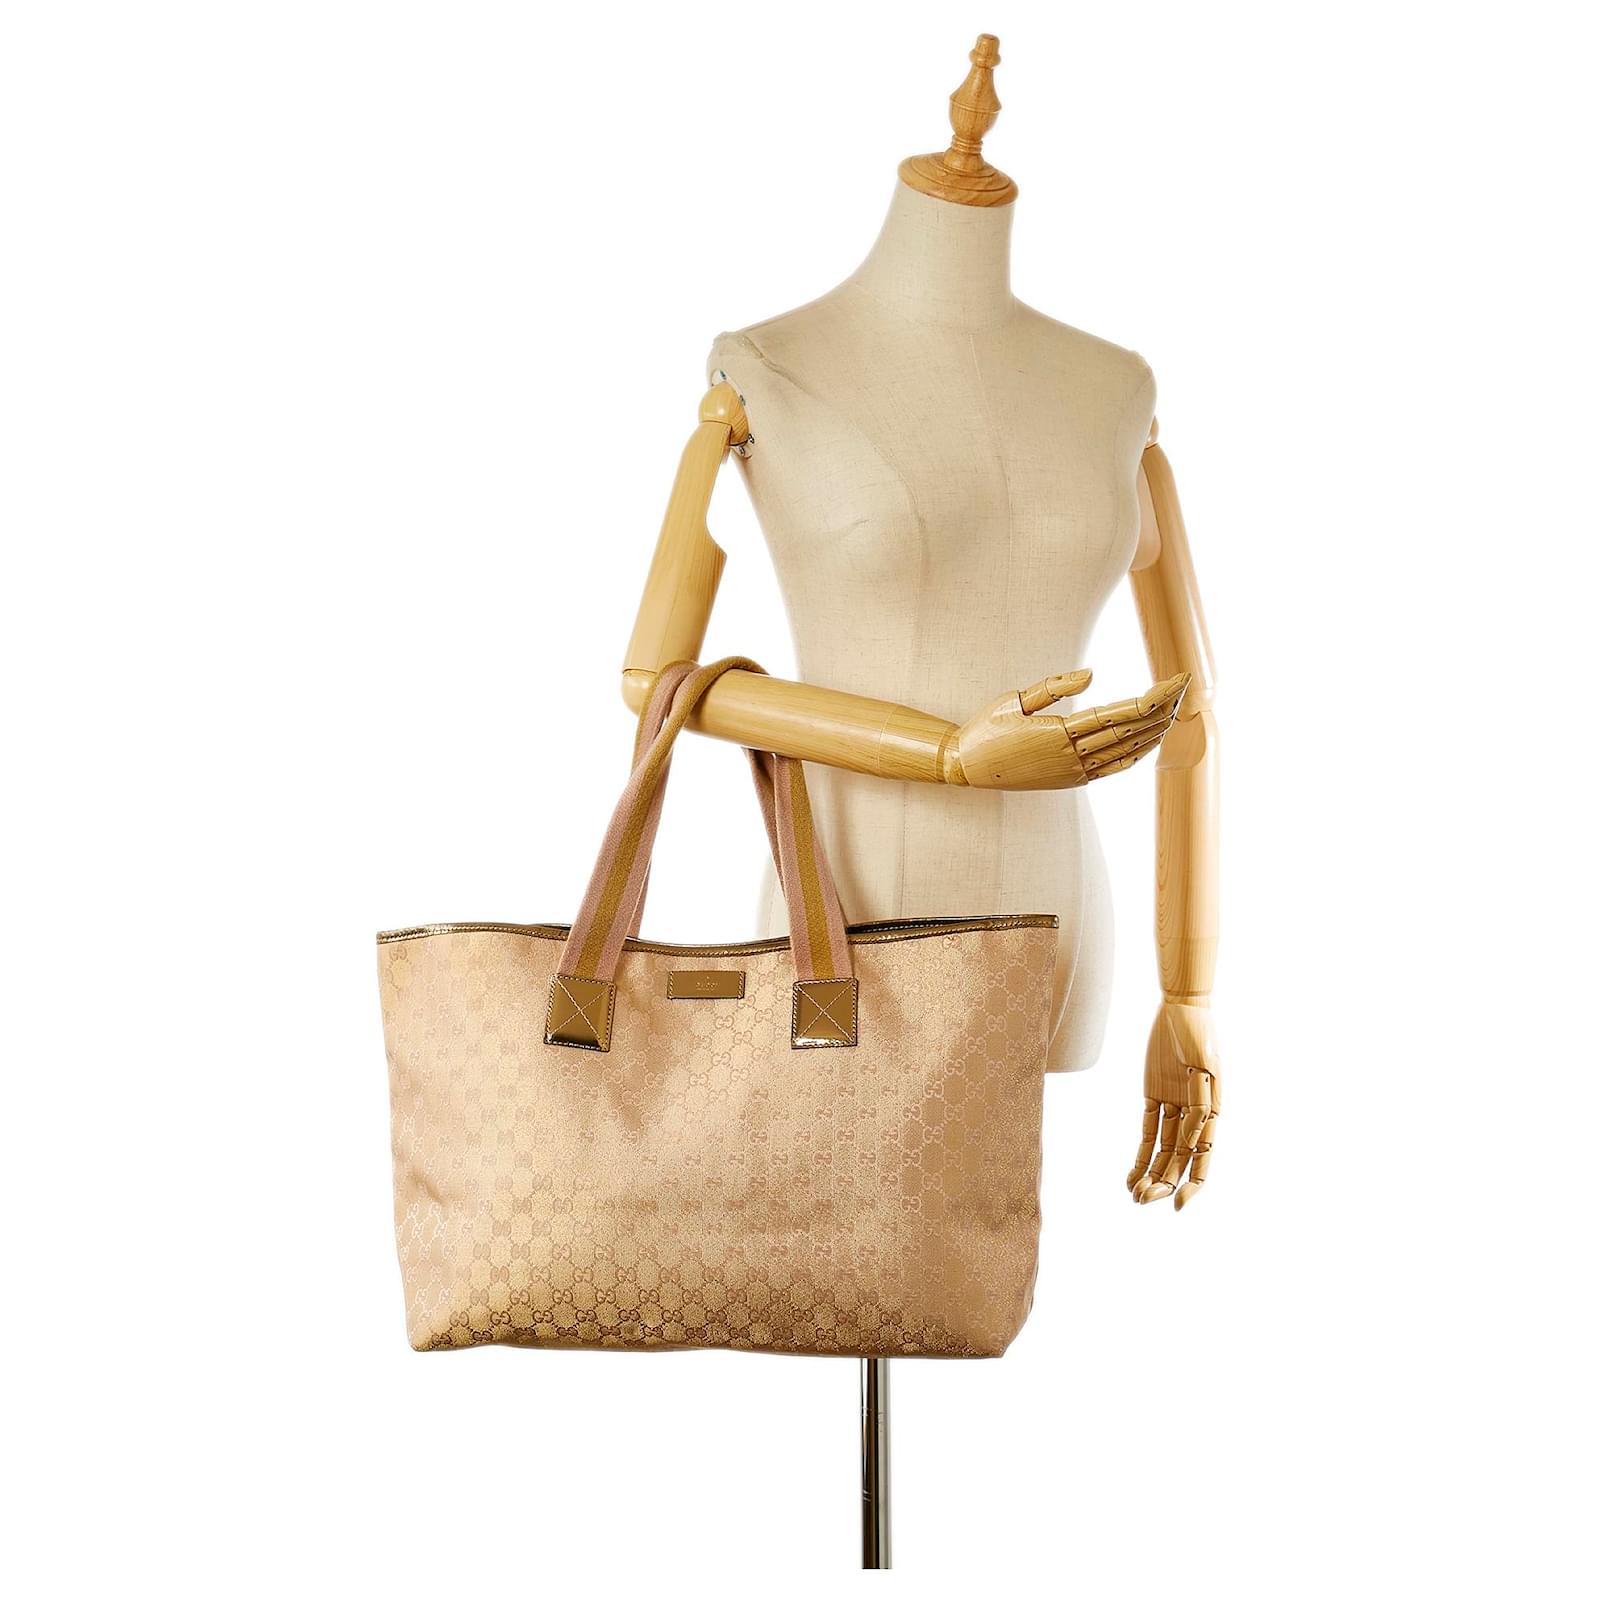 GUCCI 267474 GG Canvas Tote Bag Gold w/Dust bag